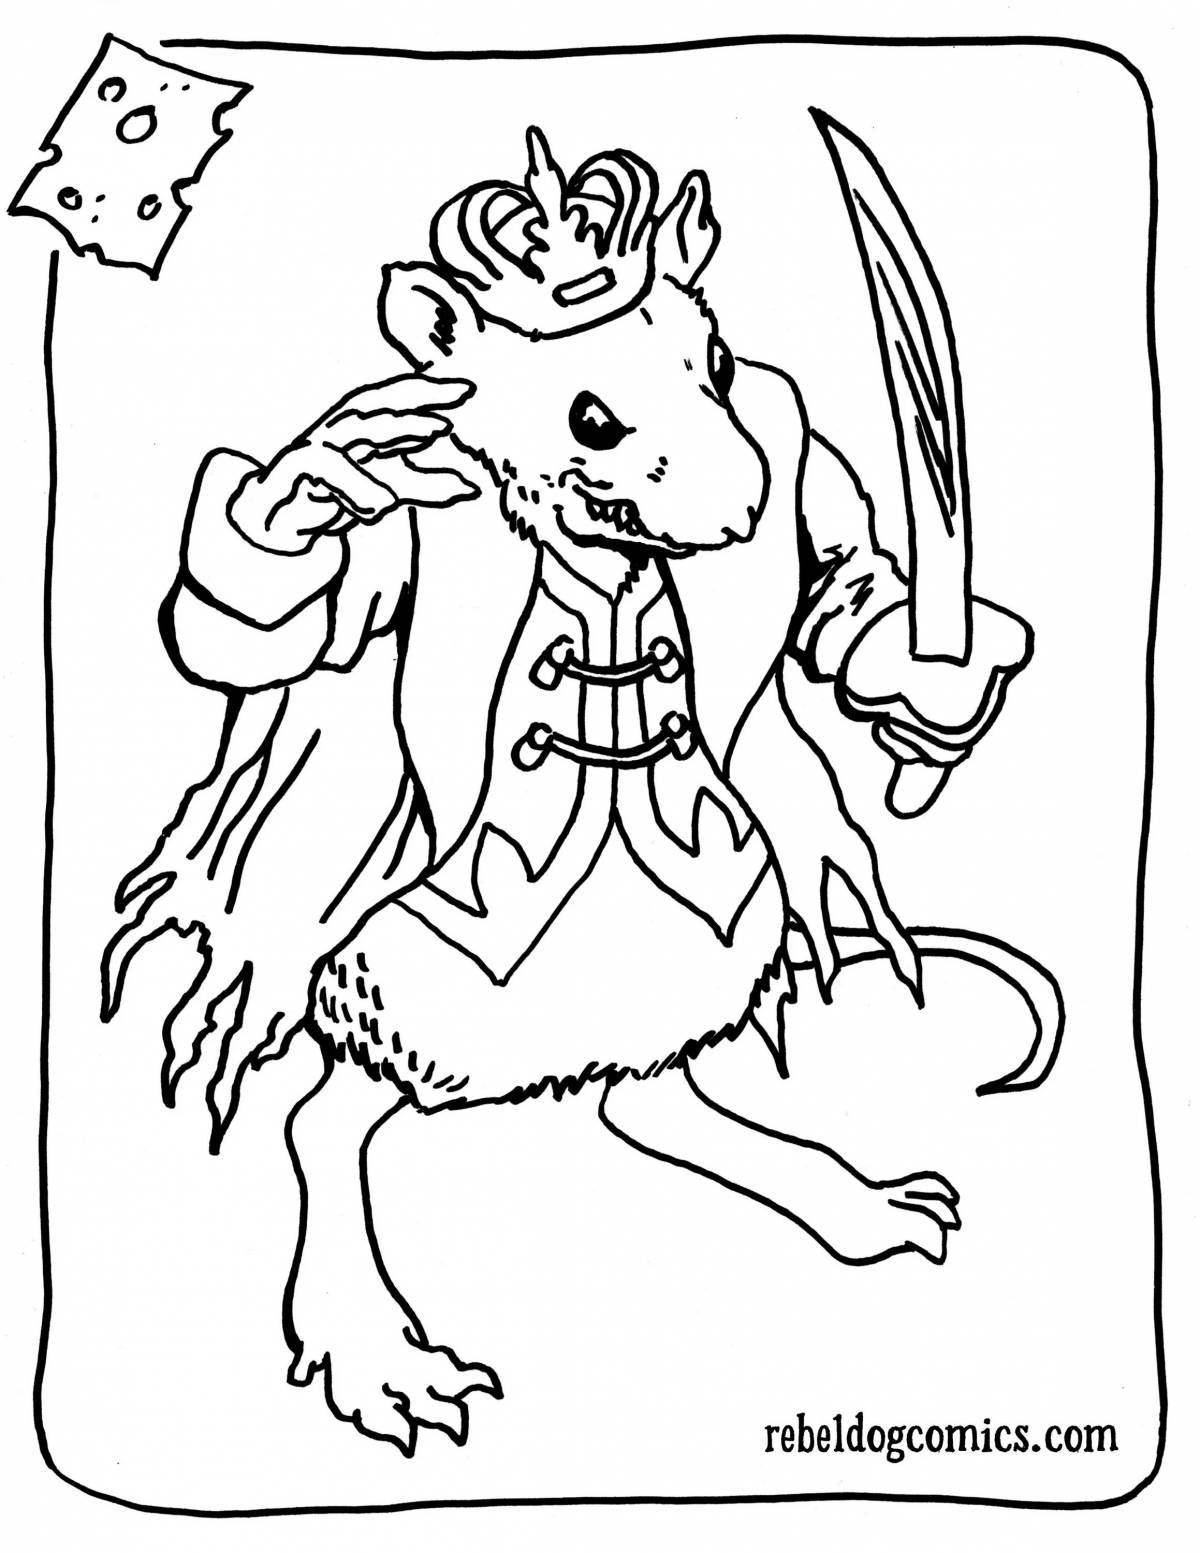 The wild nutcracker and the mouse king coloring book